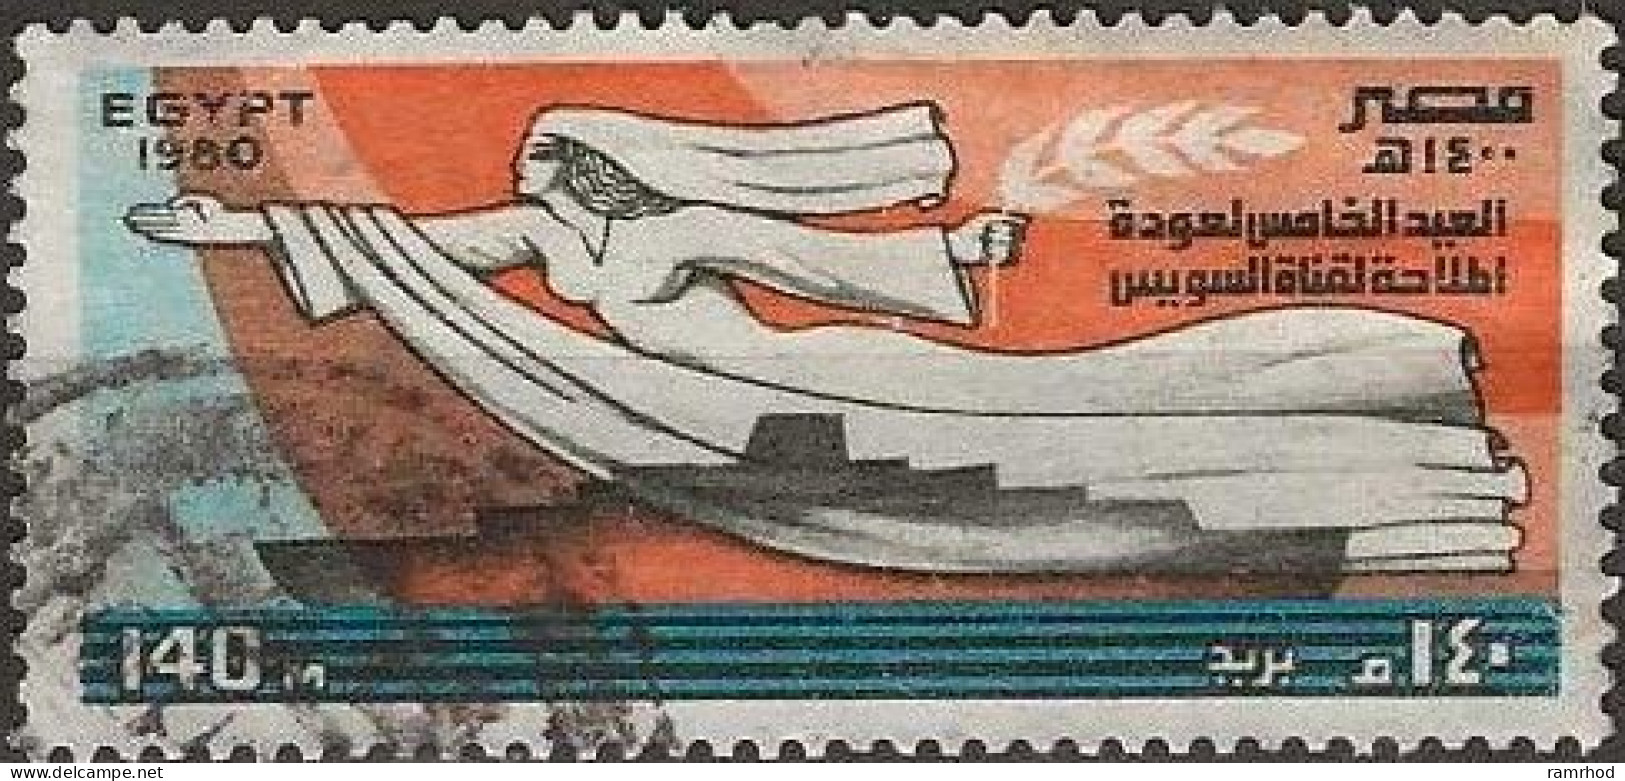 EGYPT 1980 Fifth Anniversary Of Re-opening Of Suez Canal - 140m - Ship And Figure Symbolising Peace And Freedom FU - Oblitérés